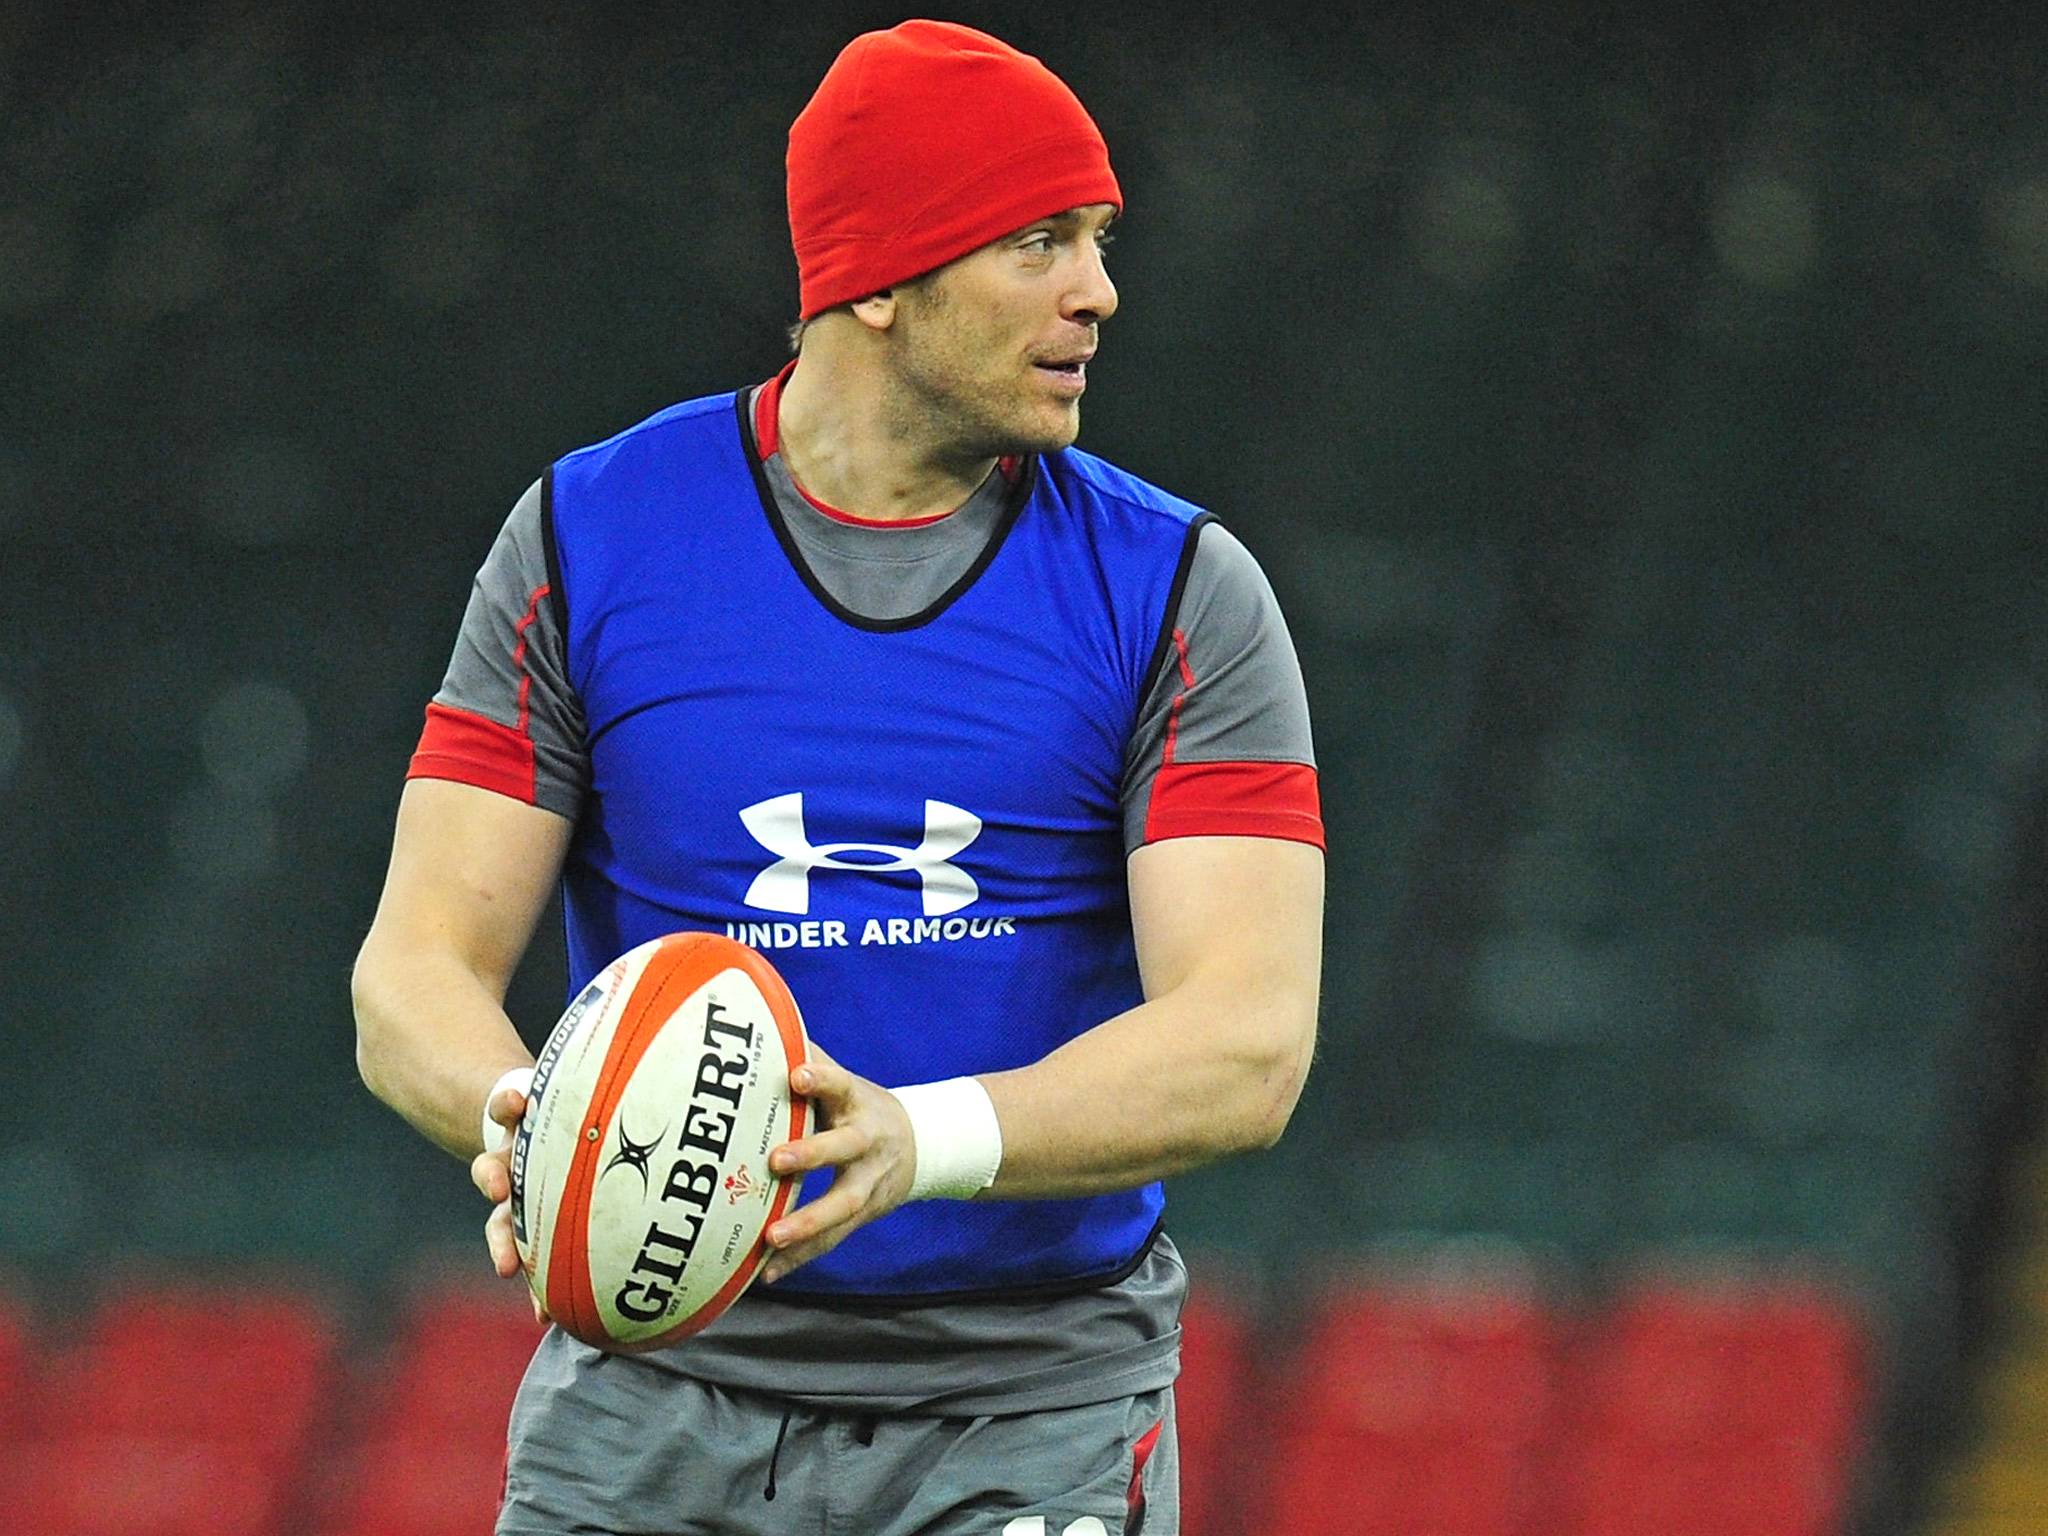 Alun Wyn Jones is back in training after a foot infection